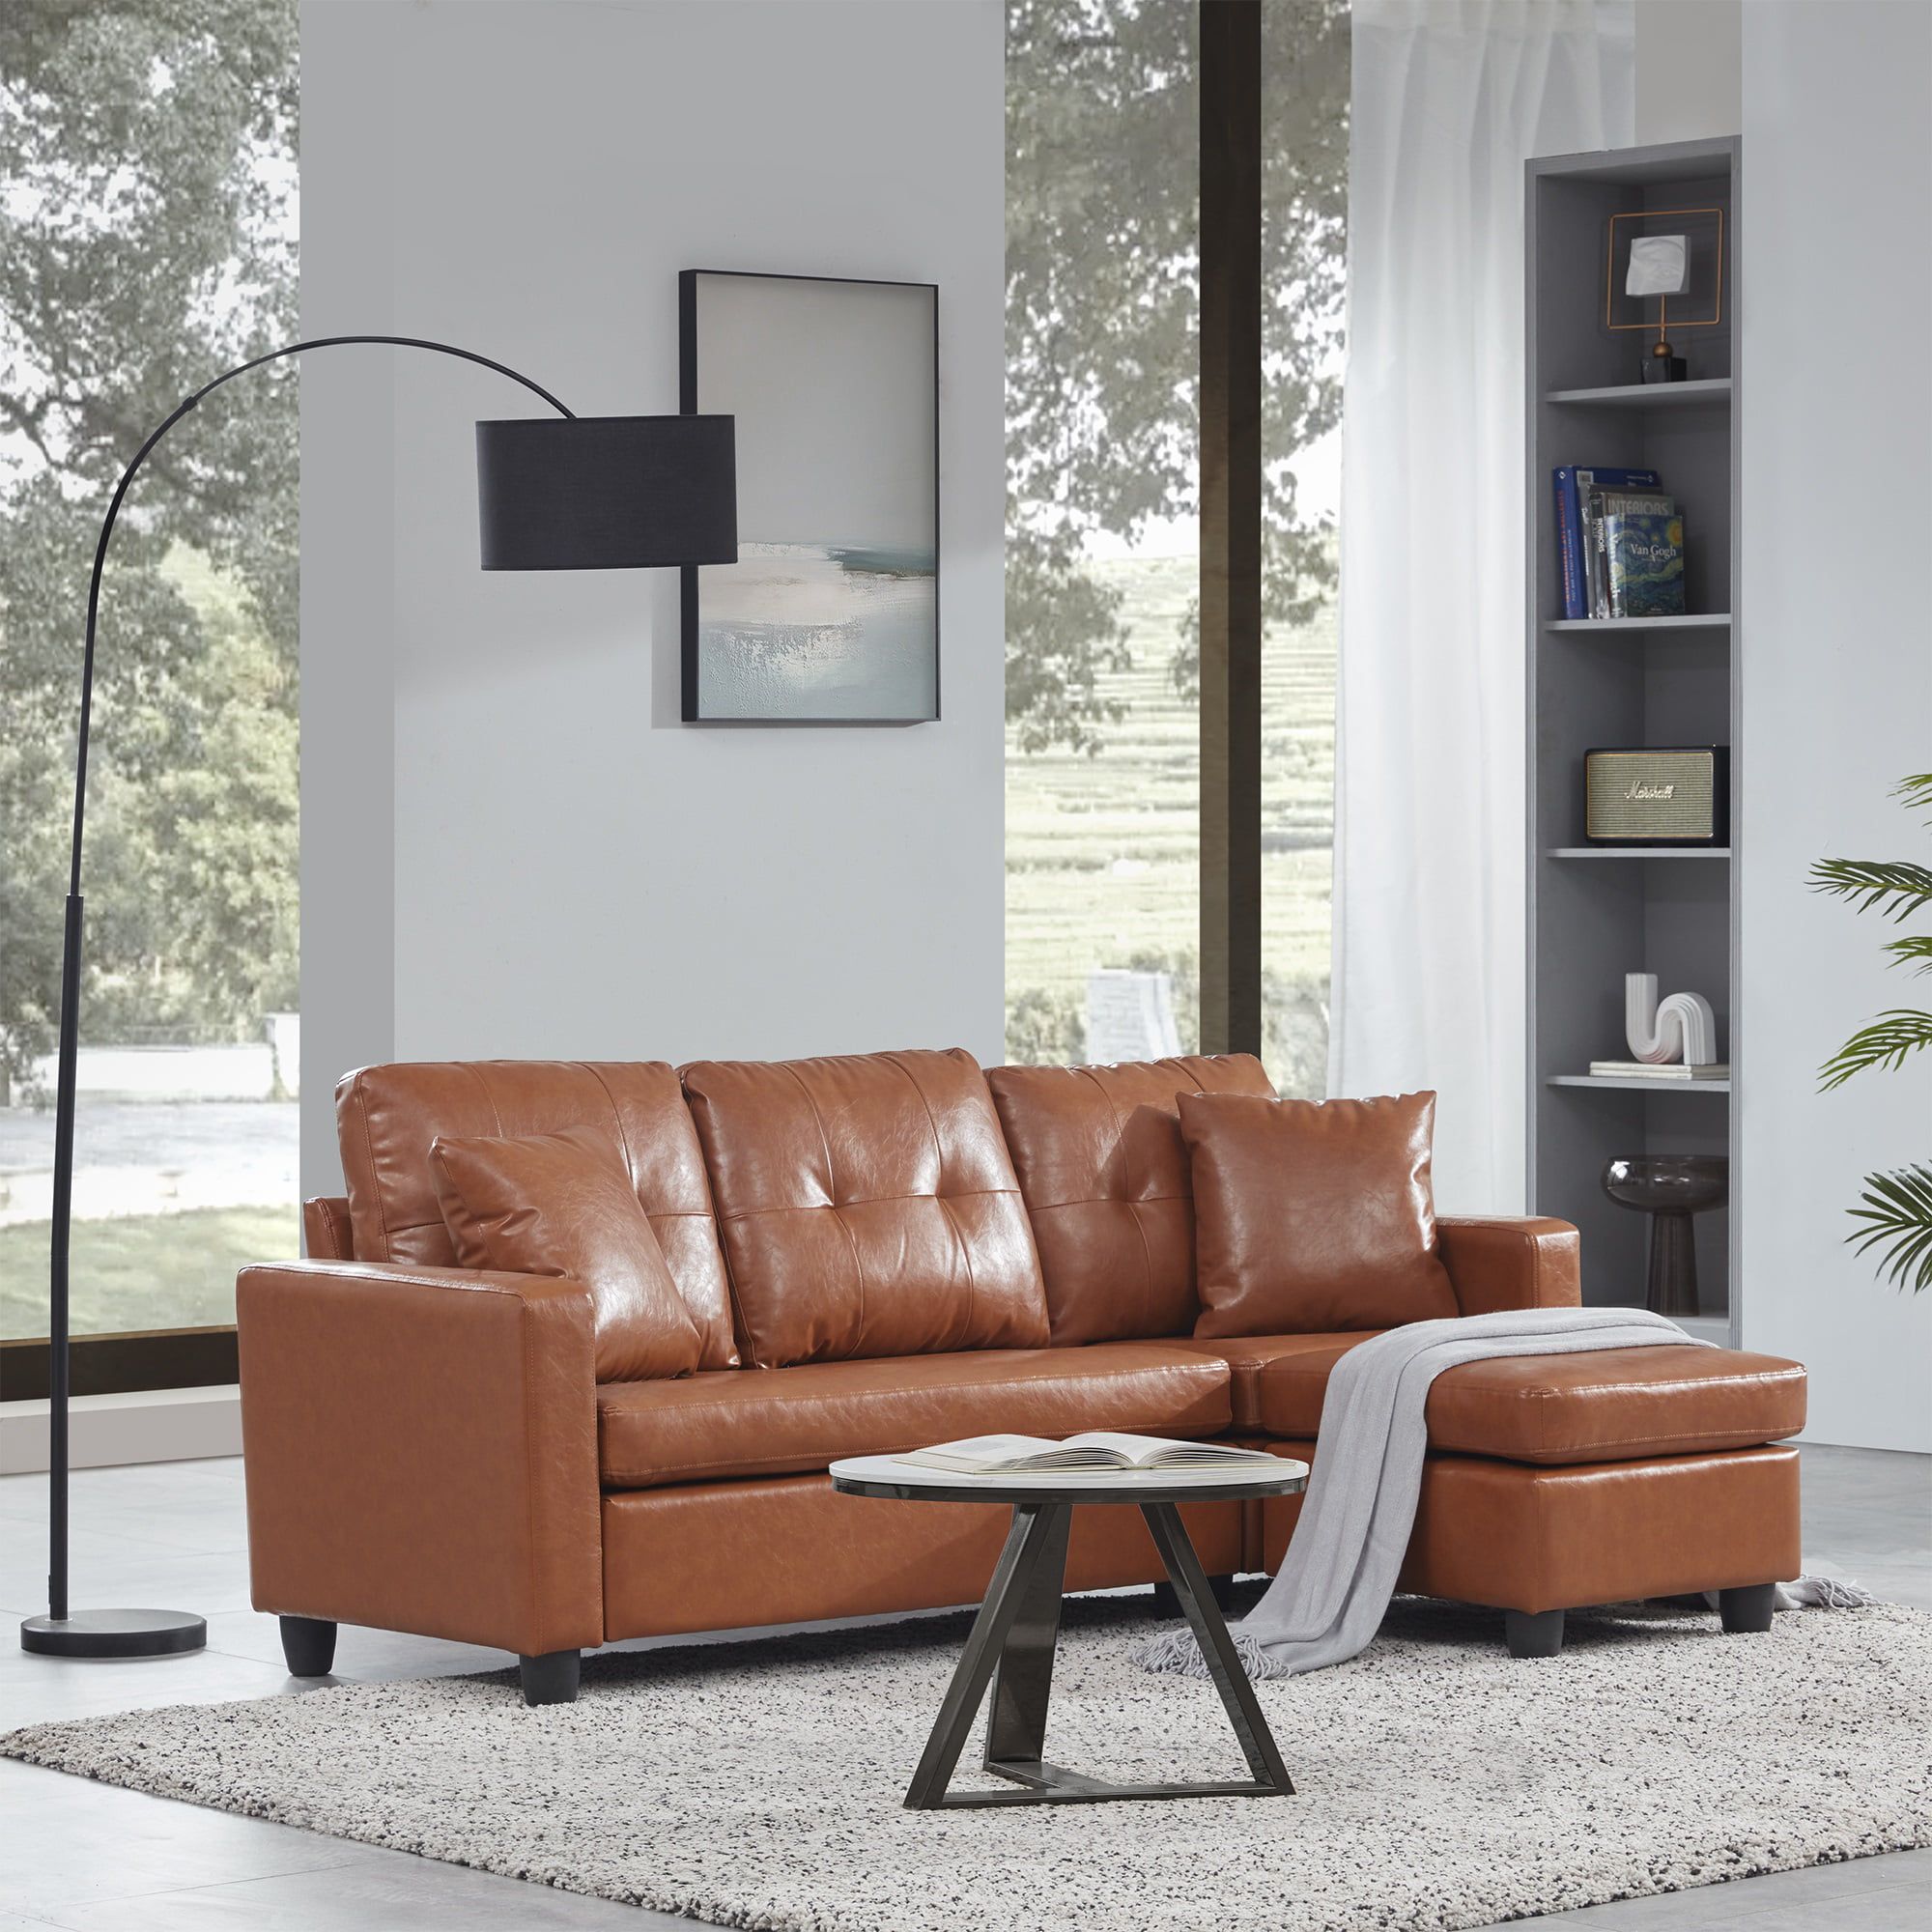 Belleze Altera Convertible Sectional Sofa, Modern Faux Leather L Shaped Couch  3 Seat With Reversible Chaise For Small Space, Caramel – Walmart Within 3 Seat Convertible Sectional Sofas (View 8 of 15)